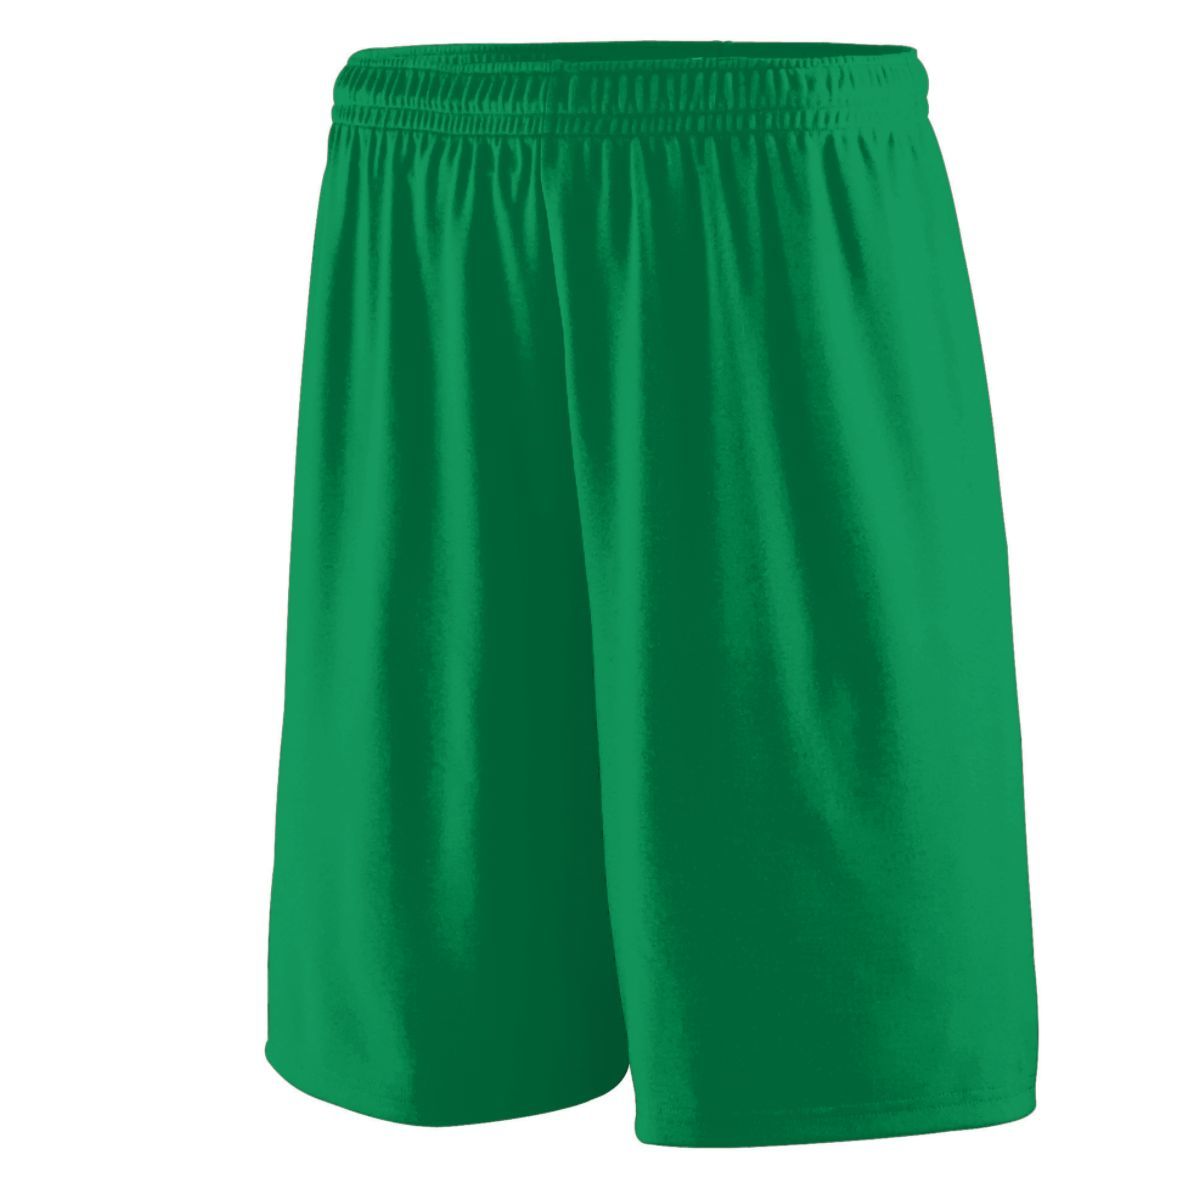 Augusta Sportswear Training Shorts in Kelly  -Part of the Adult, Adult-Shorts, Augusta-Products product lines at KanaleyCreations.com